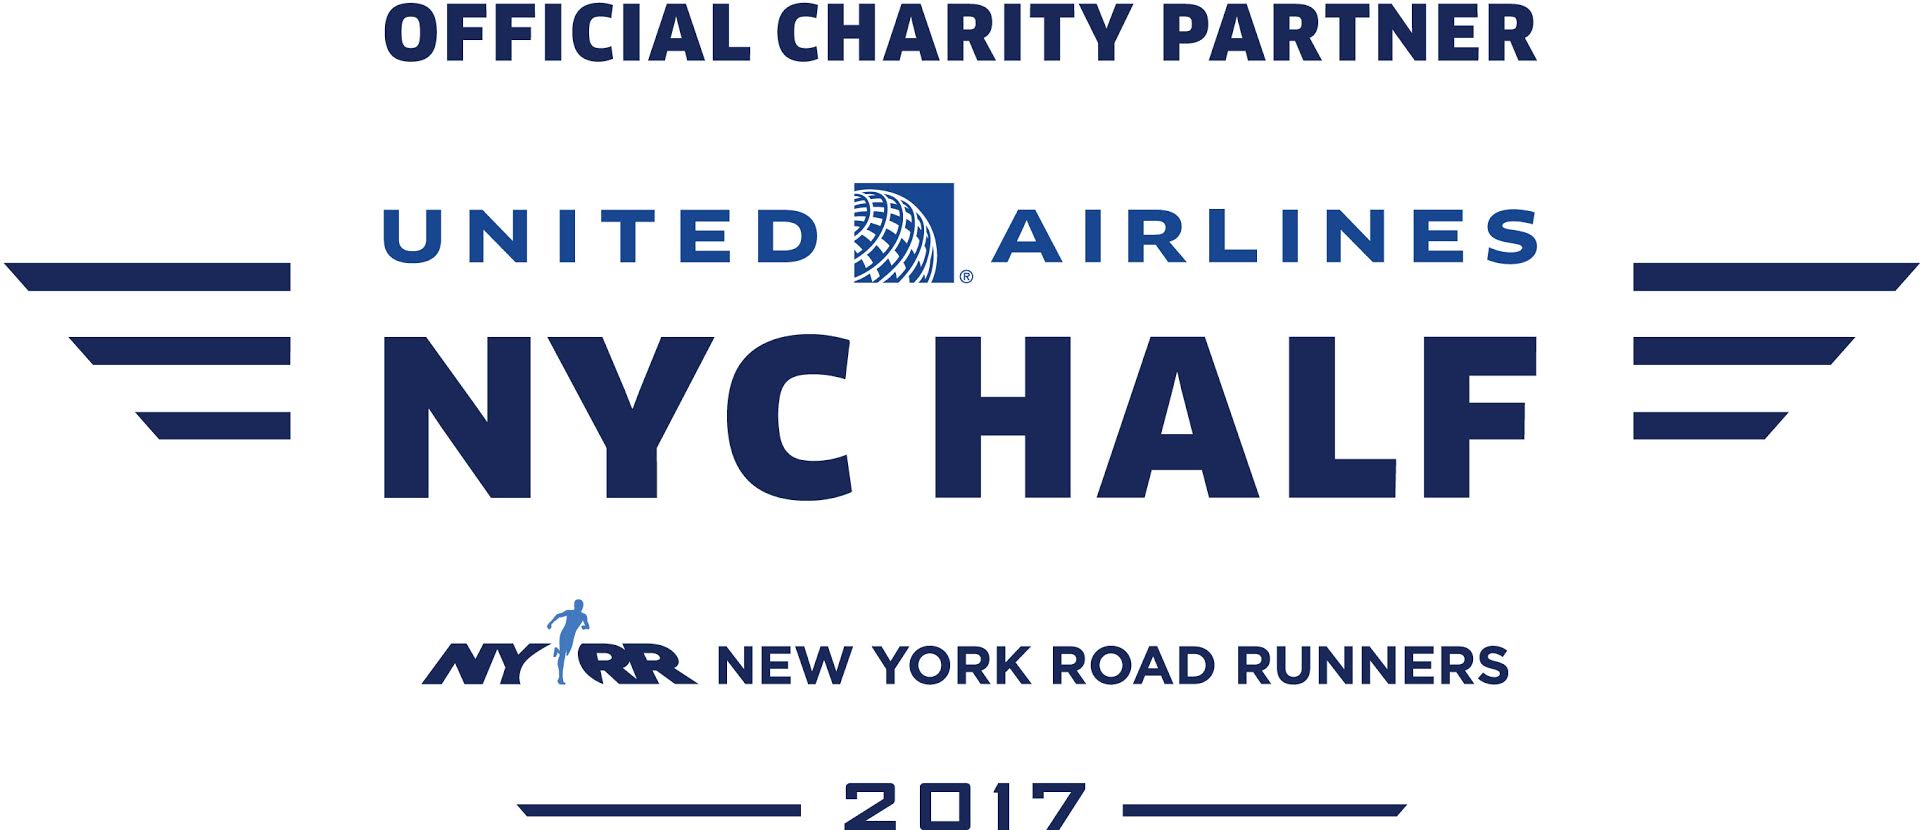 Run the United Airlines NYC Half Marathon with Team Innocence Project